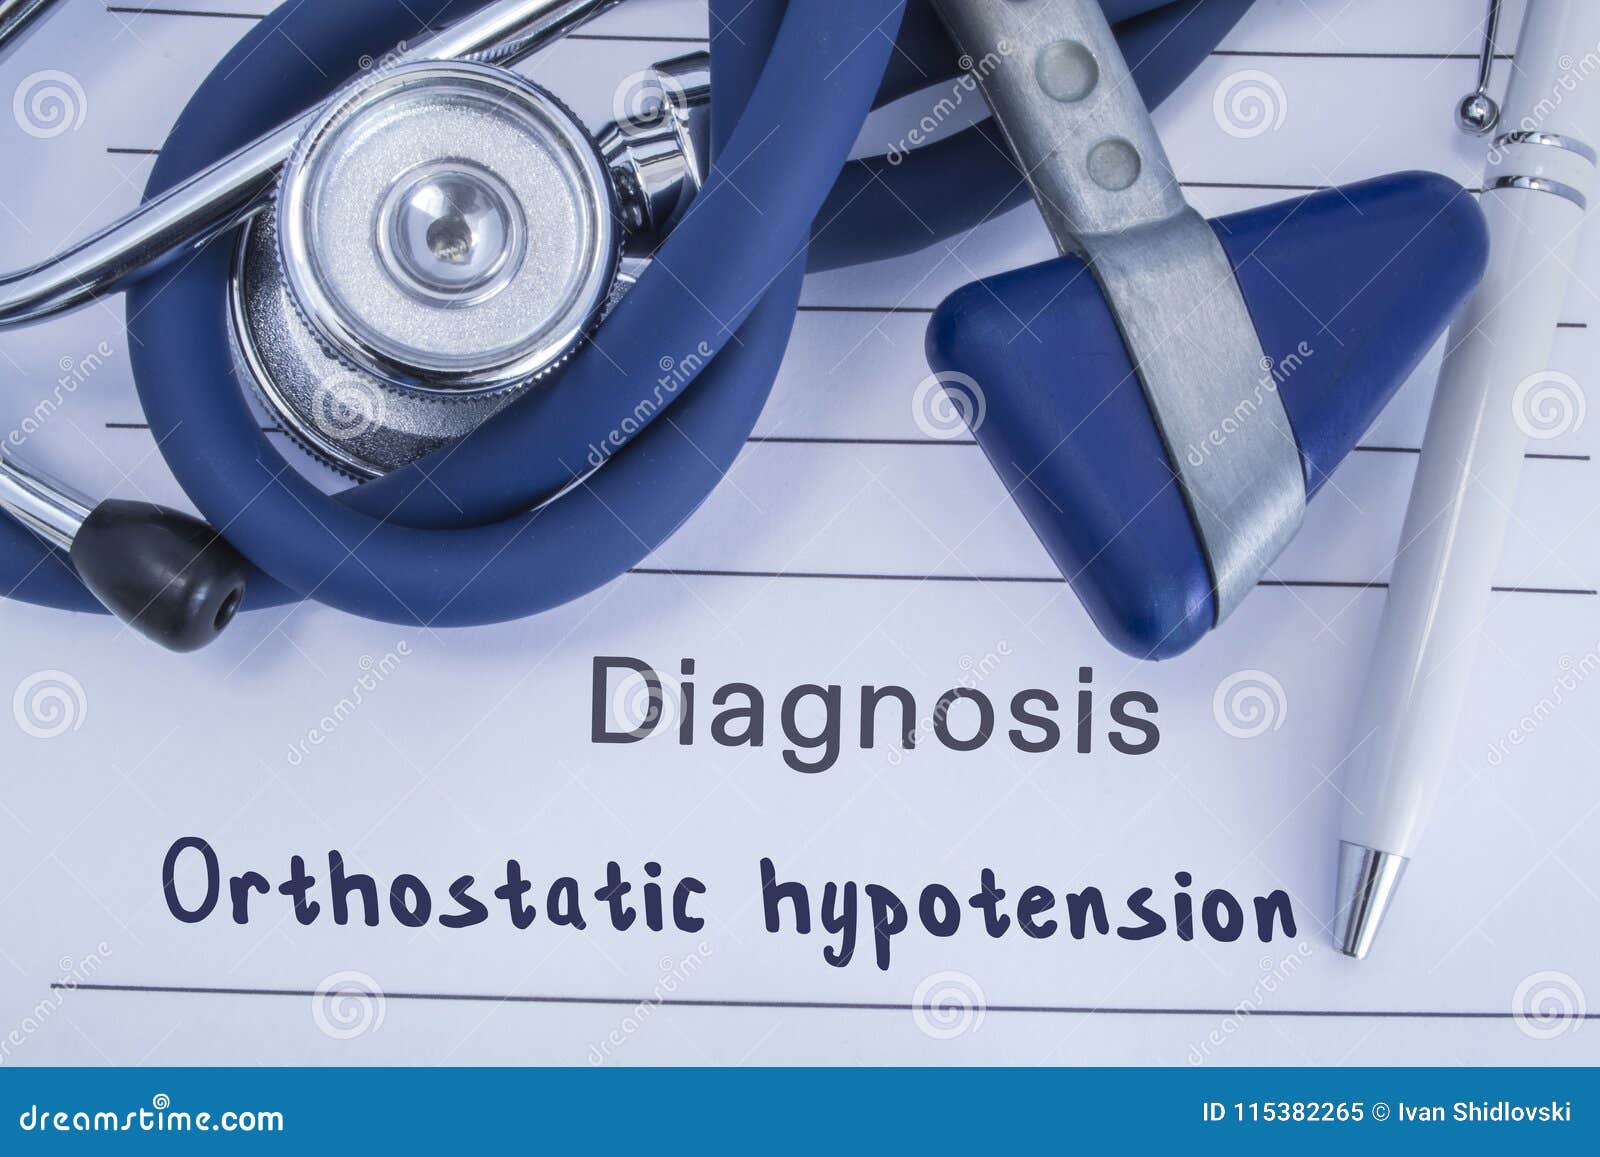 the diagnosis of orthostatic hypotension. paper medical history with diagnosis of orthostatic hypotension, on which lie blue steth